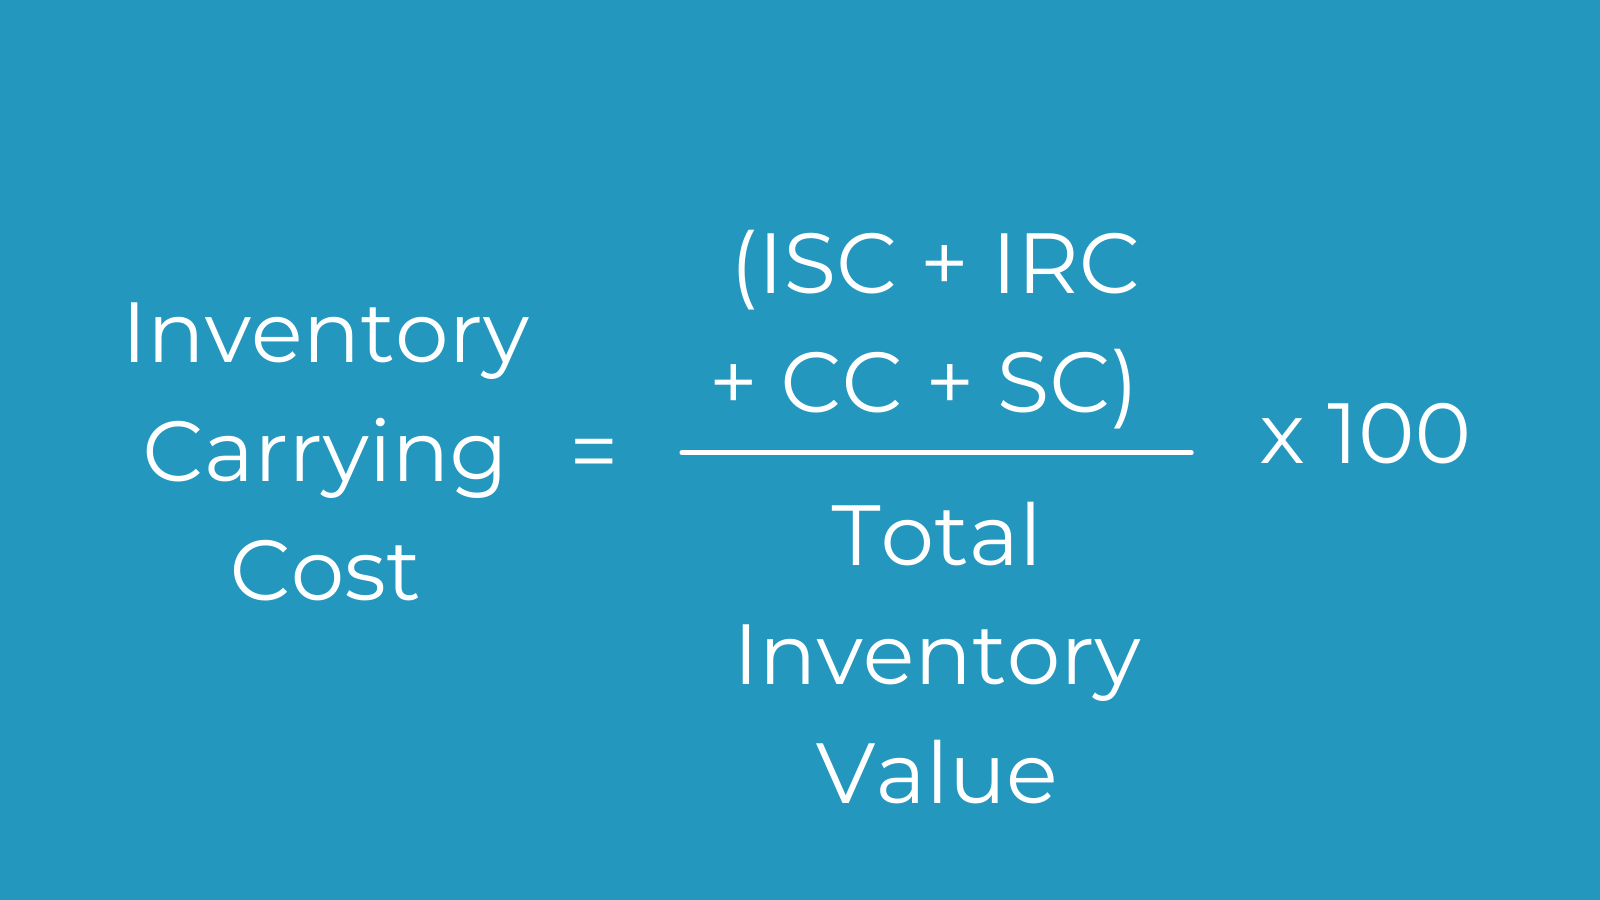 Inventory Carrying Cost Graphic